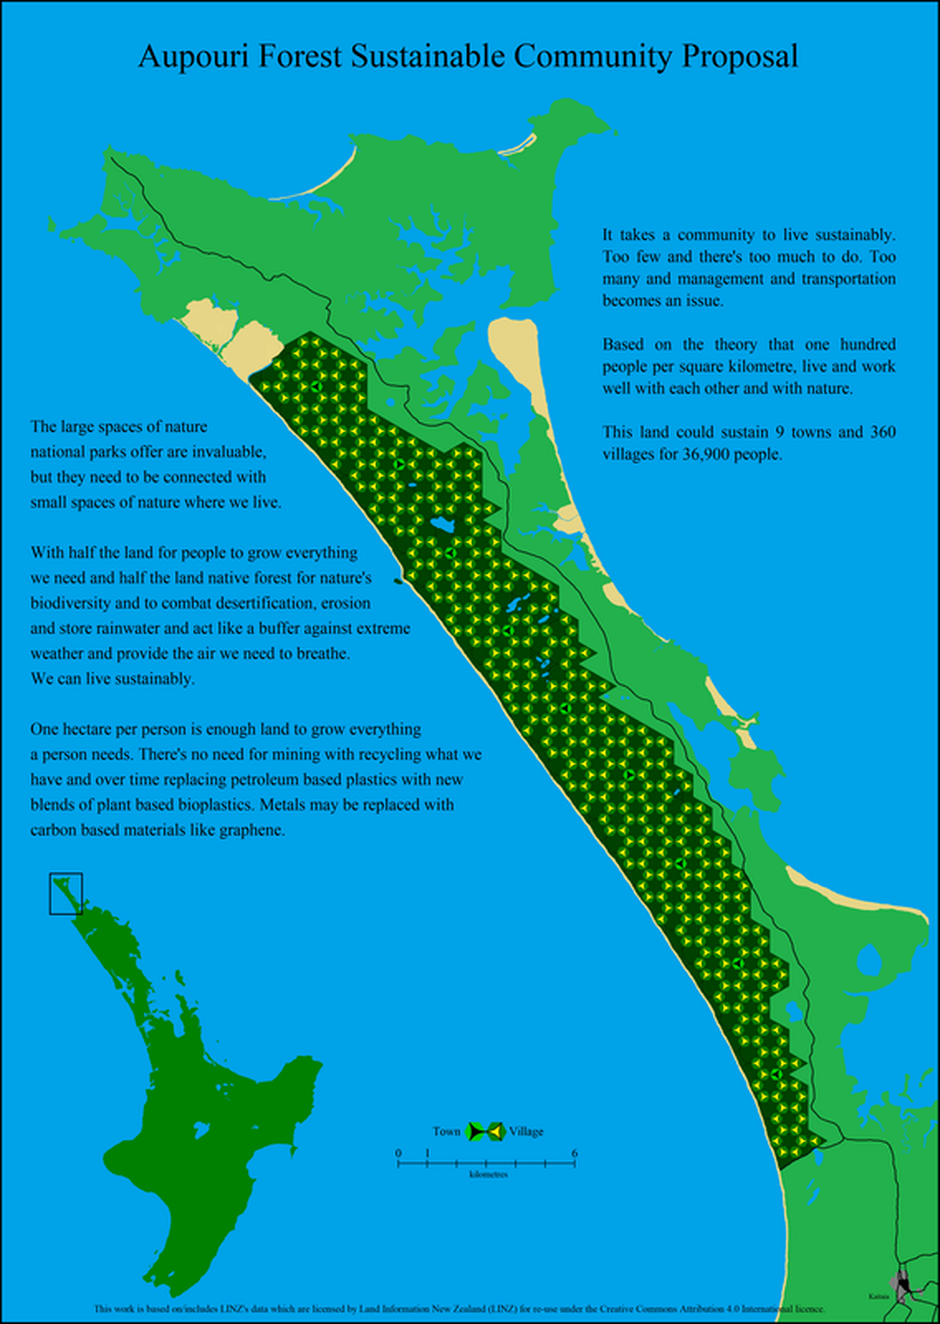 Map of The Aupouri Forest Sustainable Community Proposal and link to pdf version. This picture shows the Aupouri Forest at the top of the North Island of Aotearoa New Zealand with a sustainable community of 9 towns and 360 villages for 36,900 people.